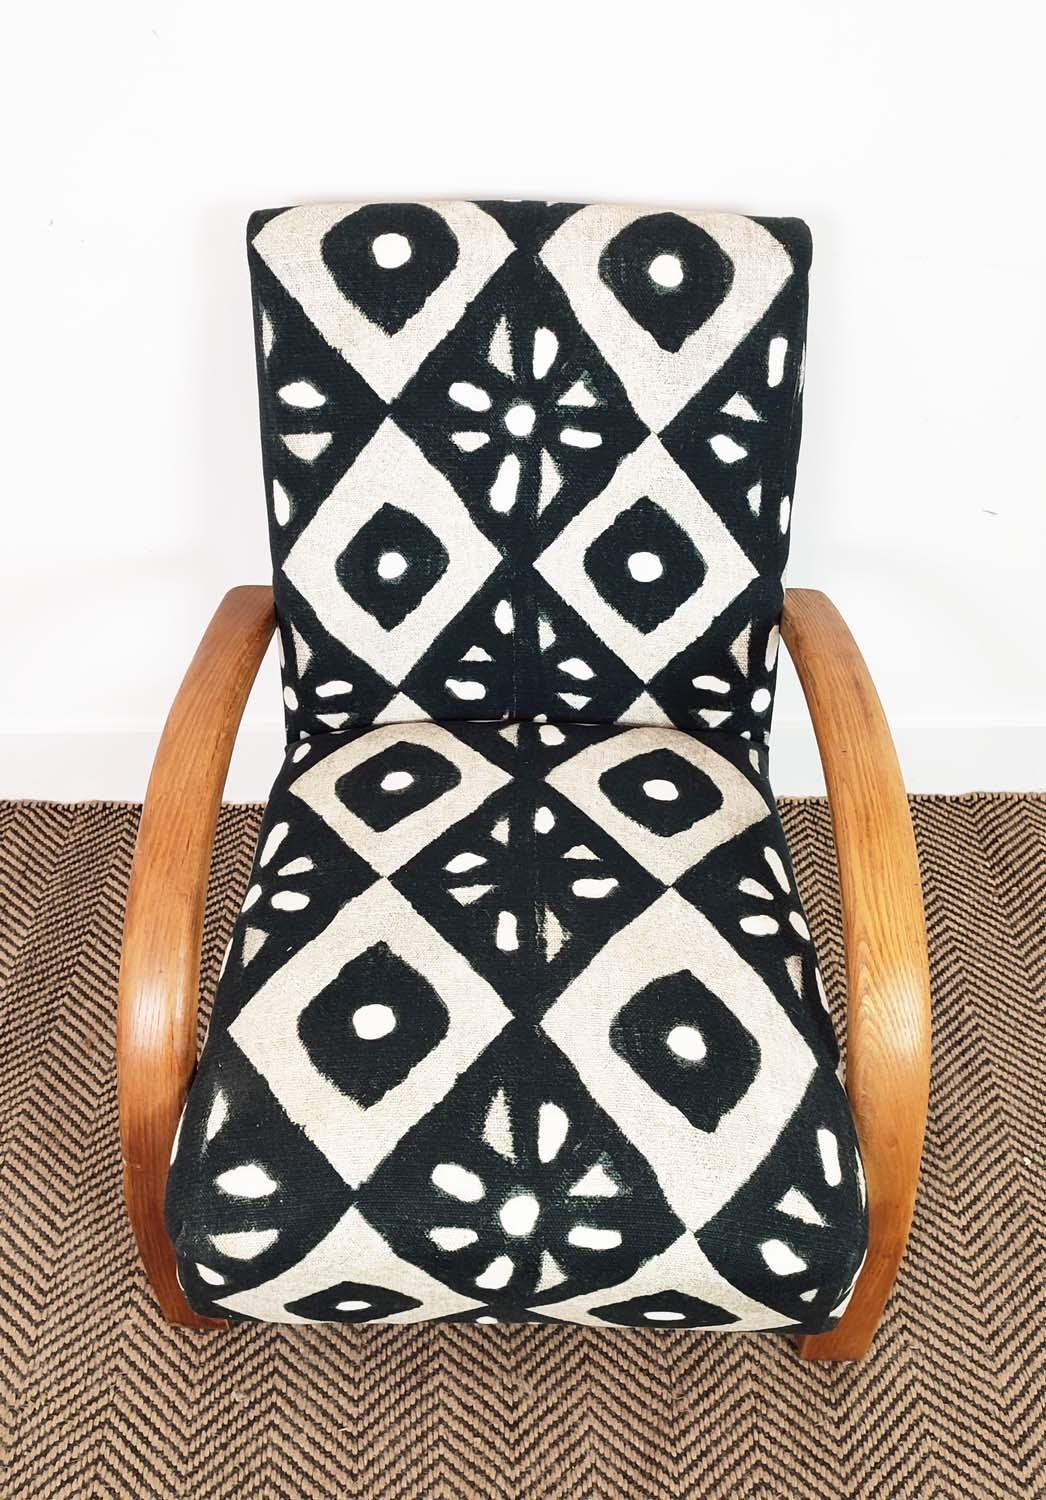 HALBALA ARMCHAIR, mid 20th century bentwood in black and white geometric material, 77cm H x 60cm W x - Image 3 of 10